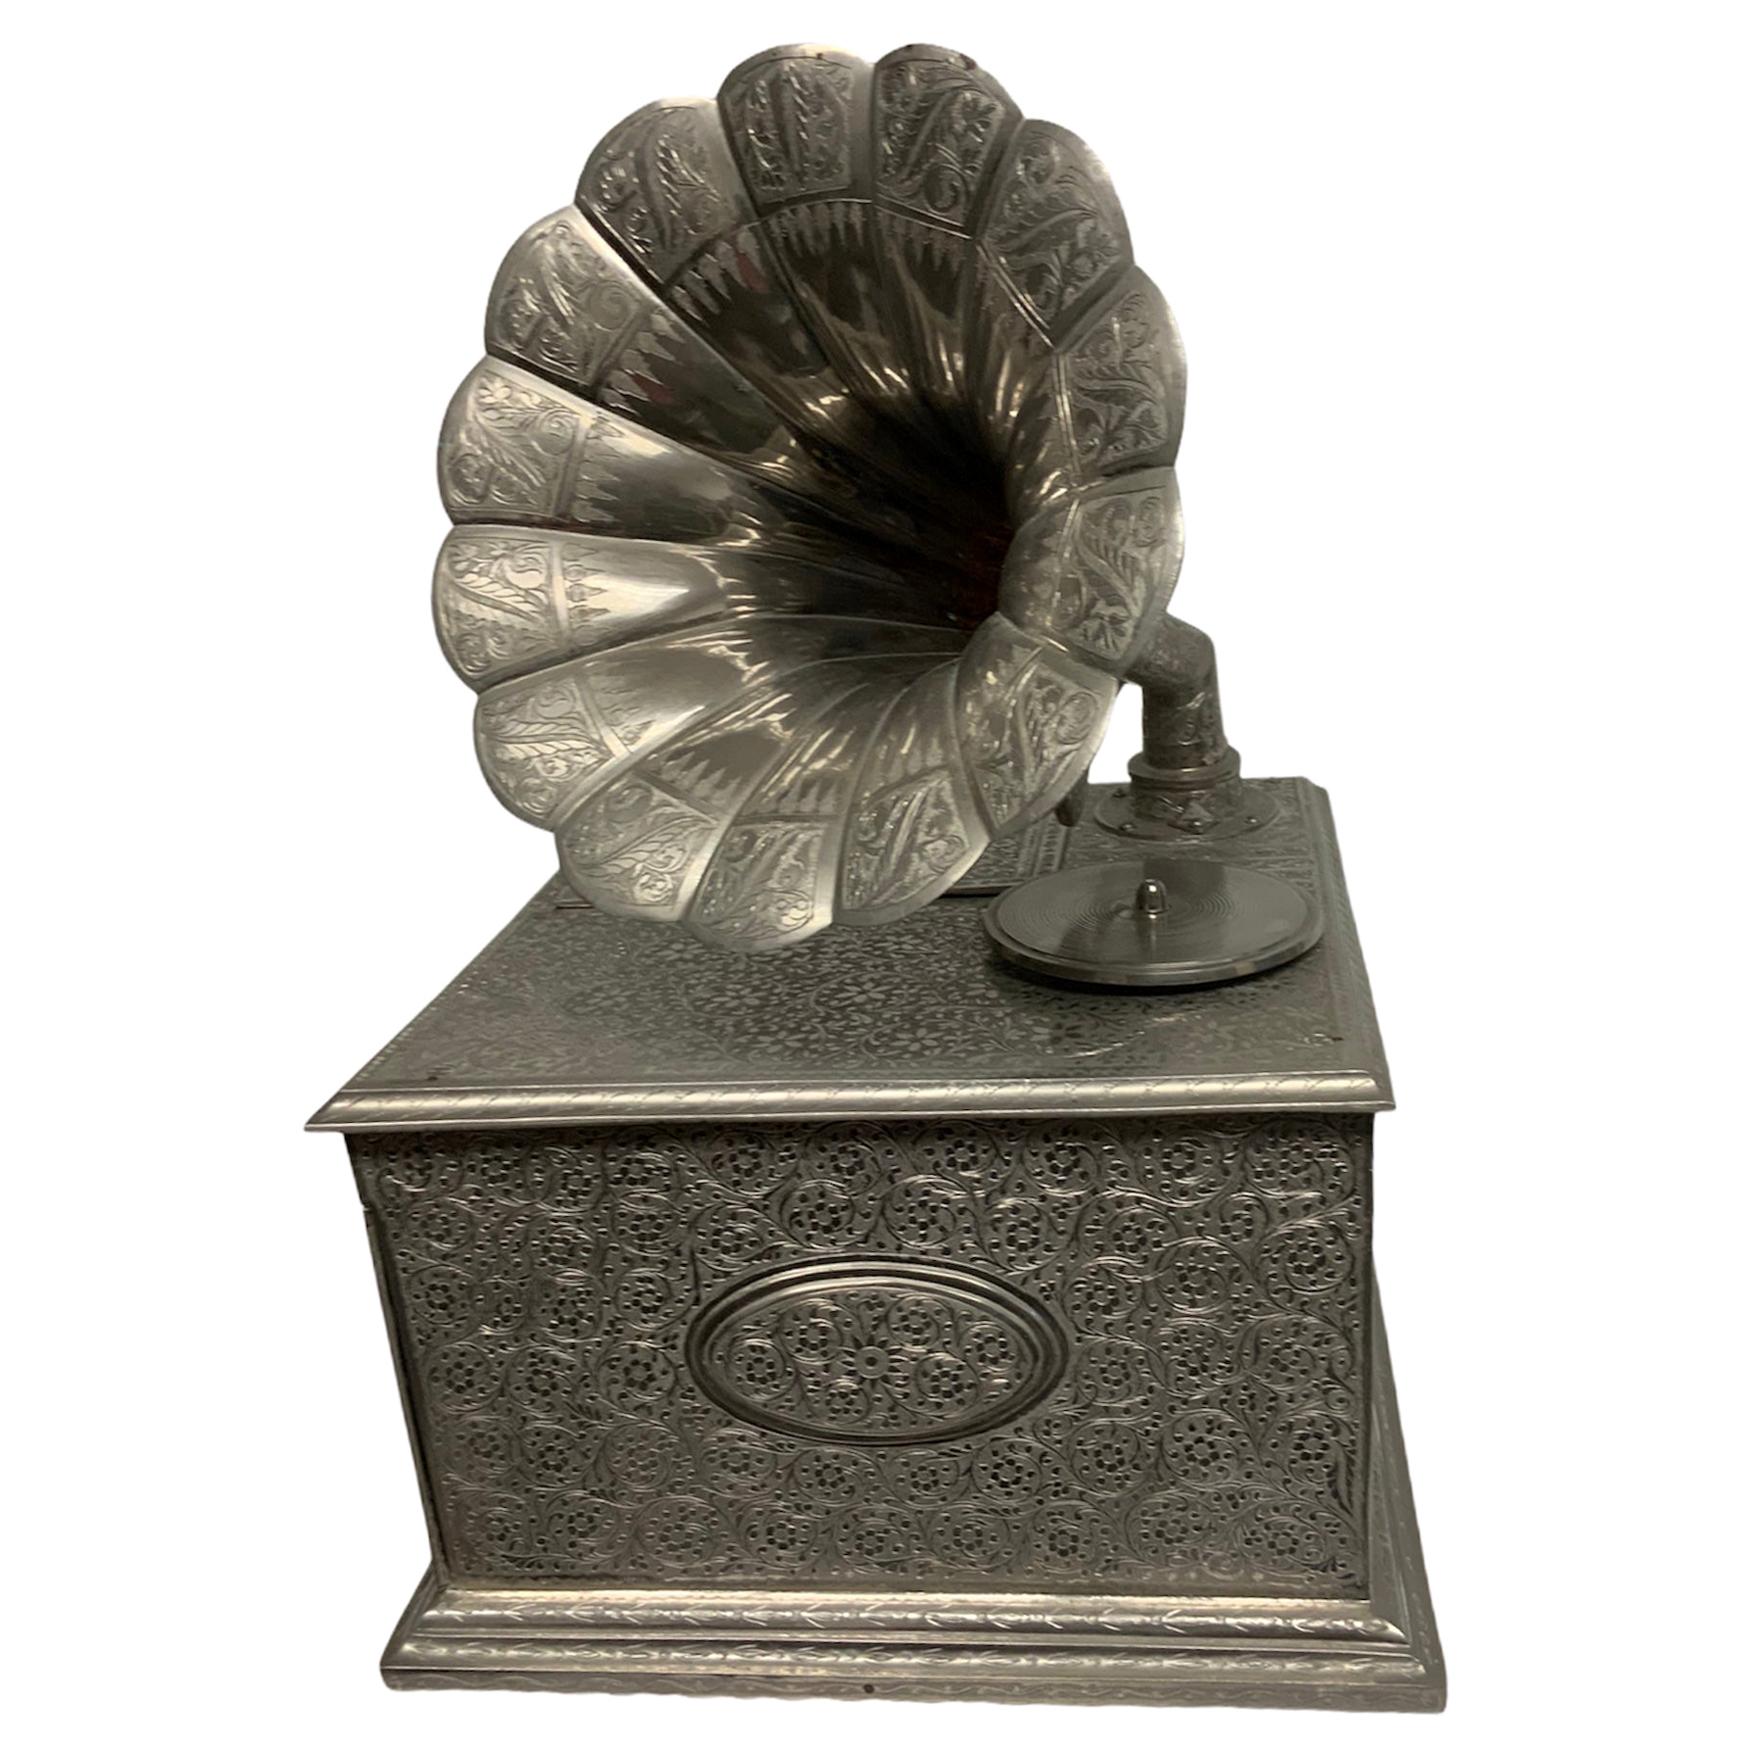 What is the horn on a phonograph called?